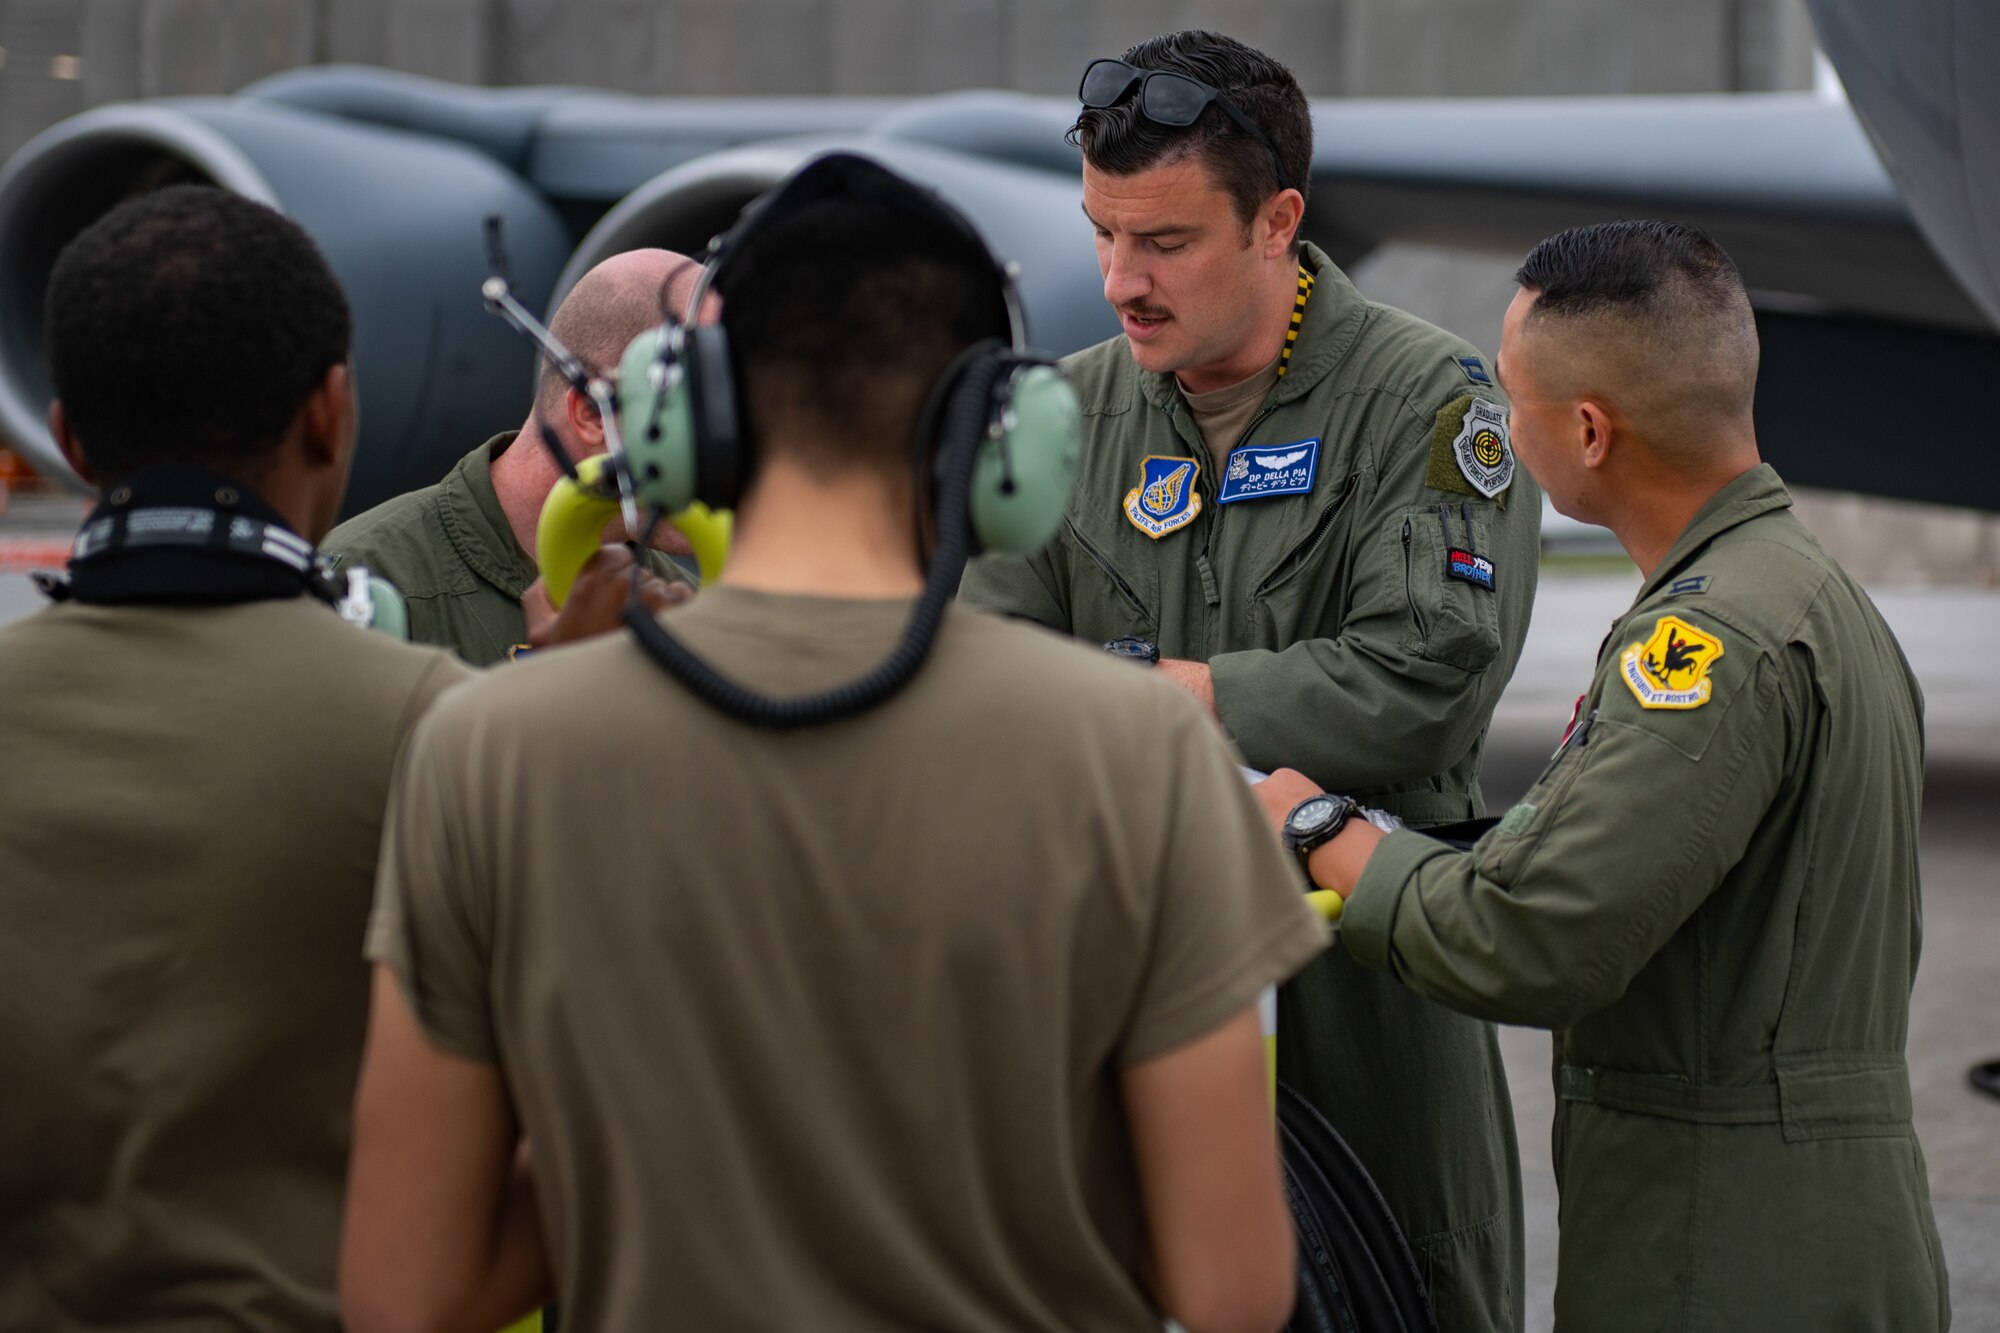 A group of airmen huddle up to discuss plans for the day